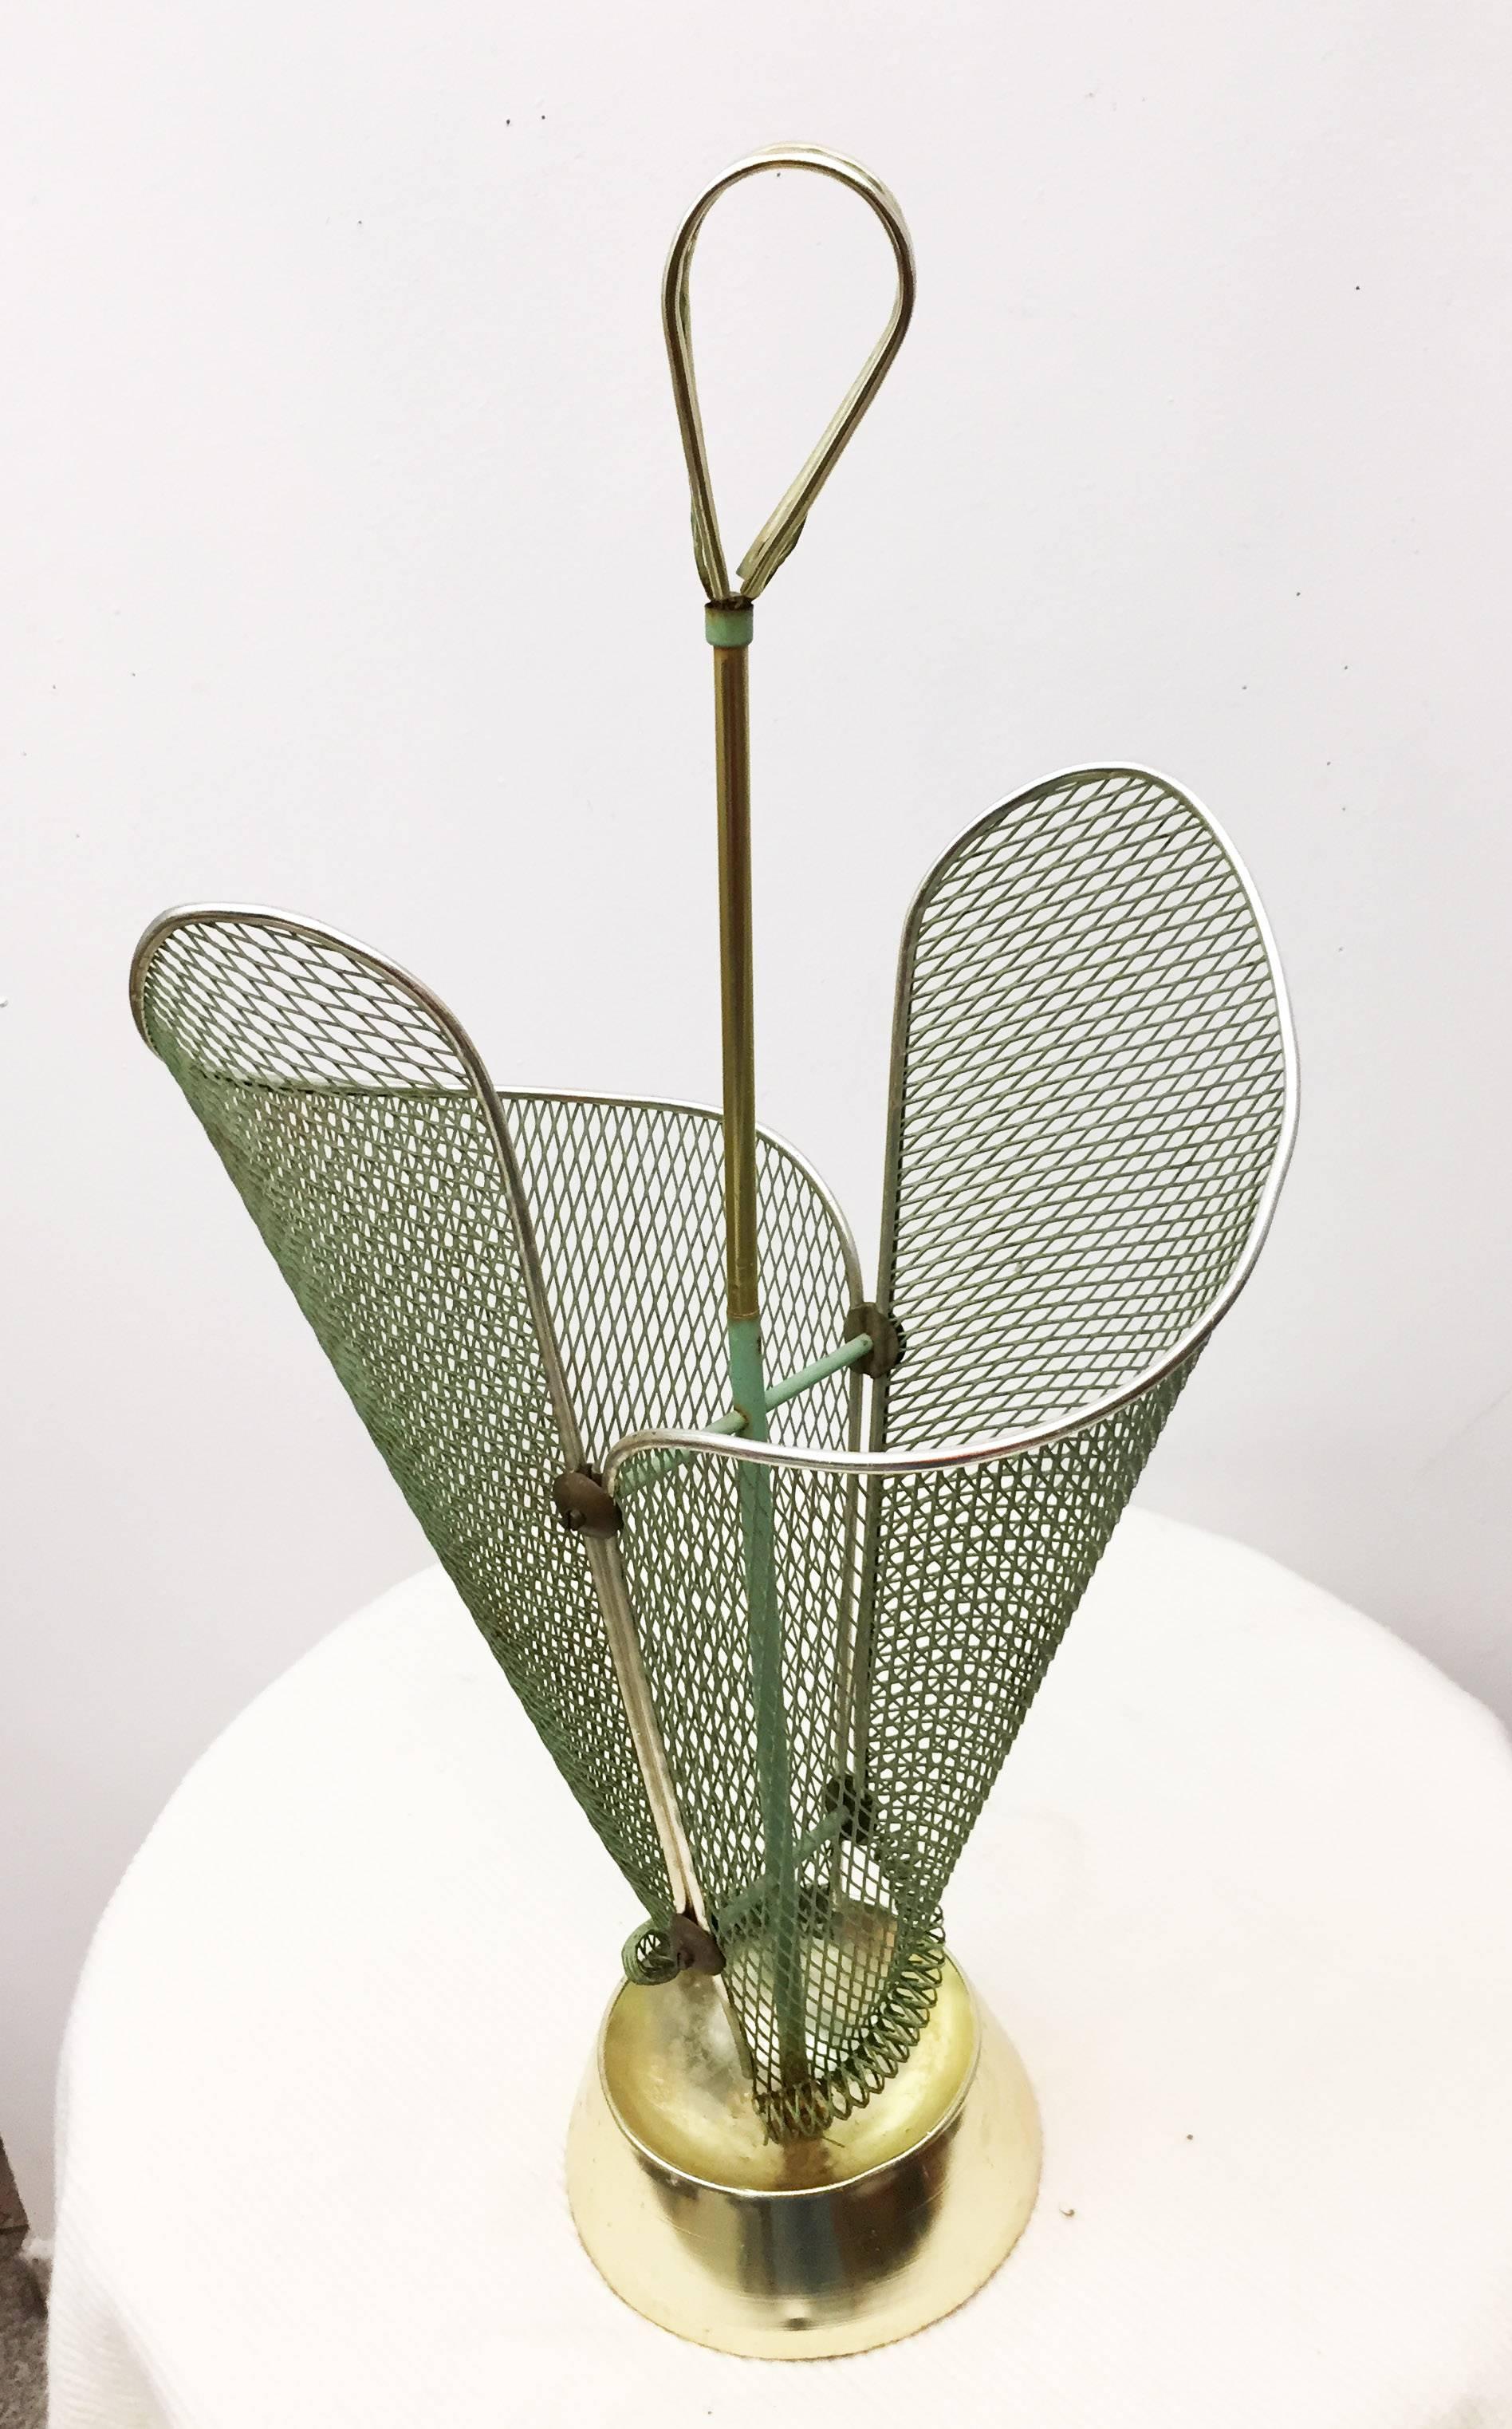 Brass construction with perforated green painted steel elements on a heavy cast iron foot. Made in Italy in the 1950s.